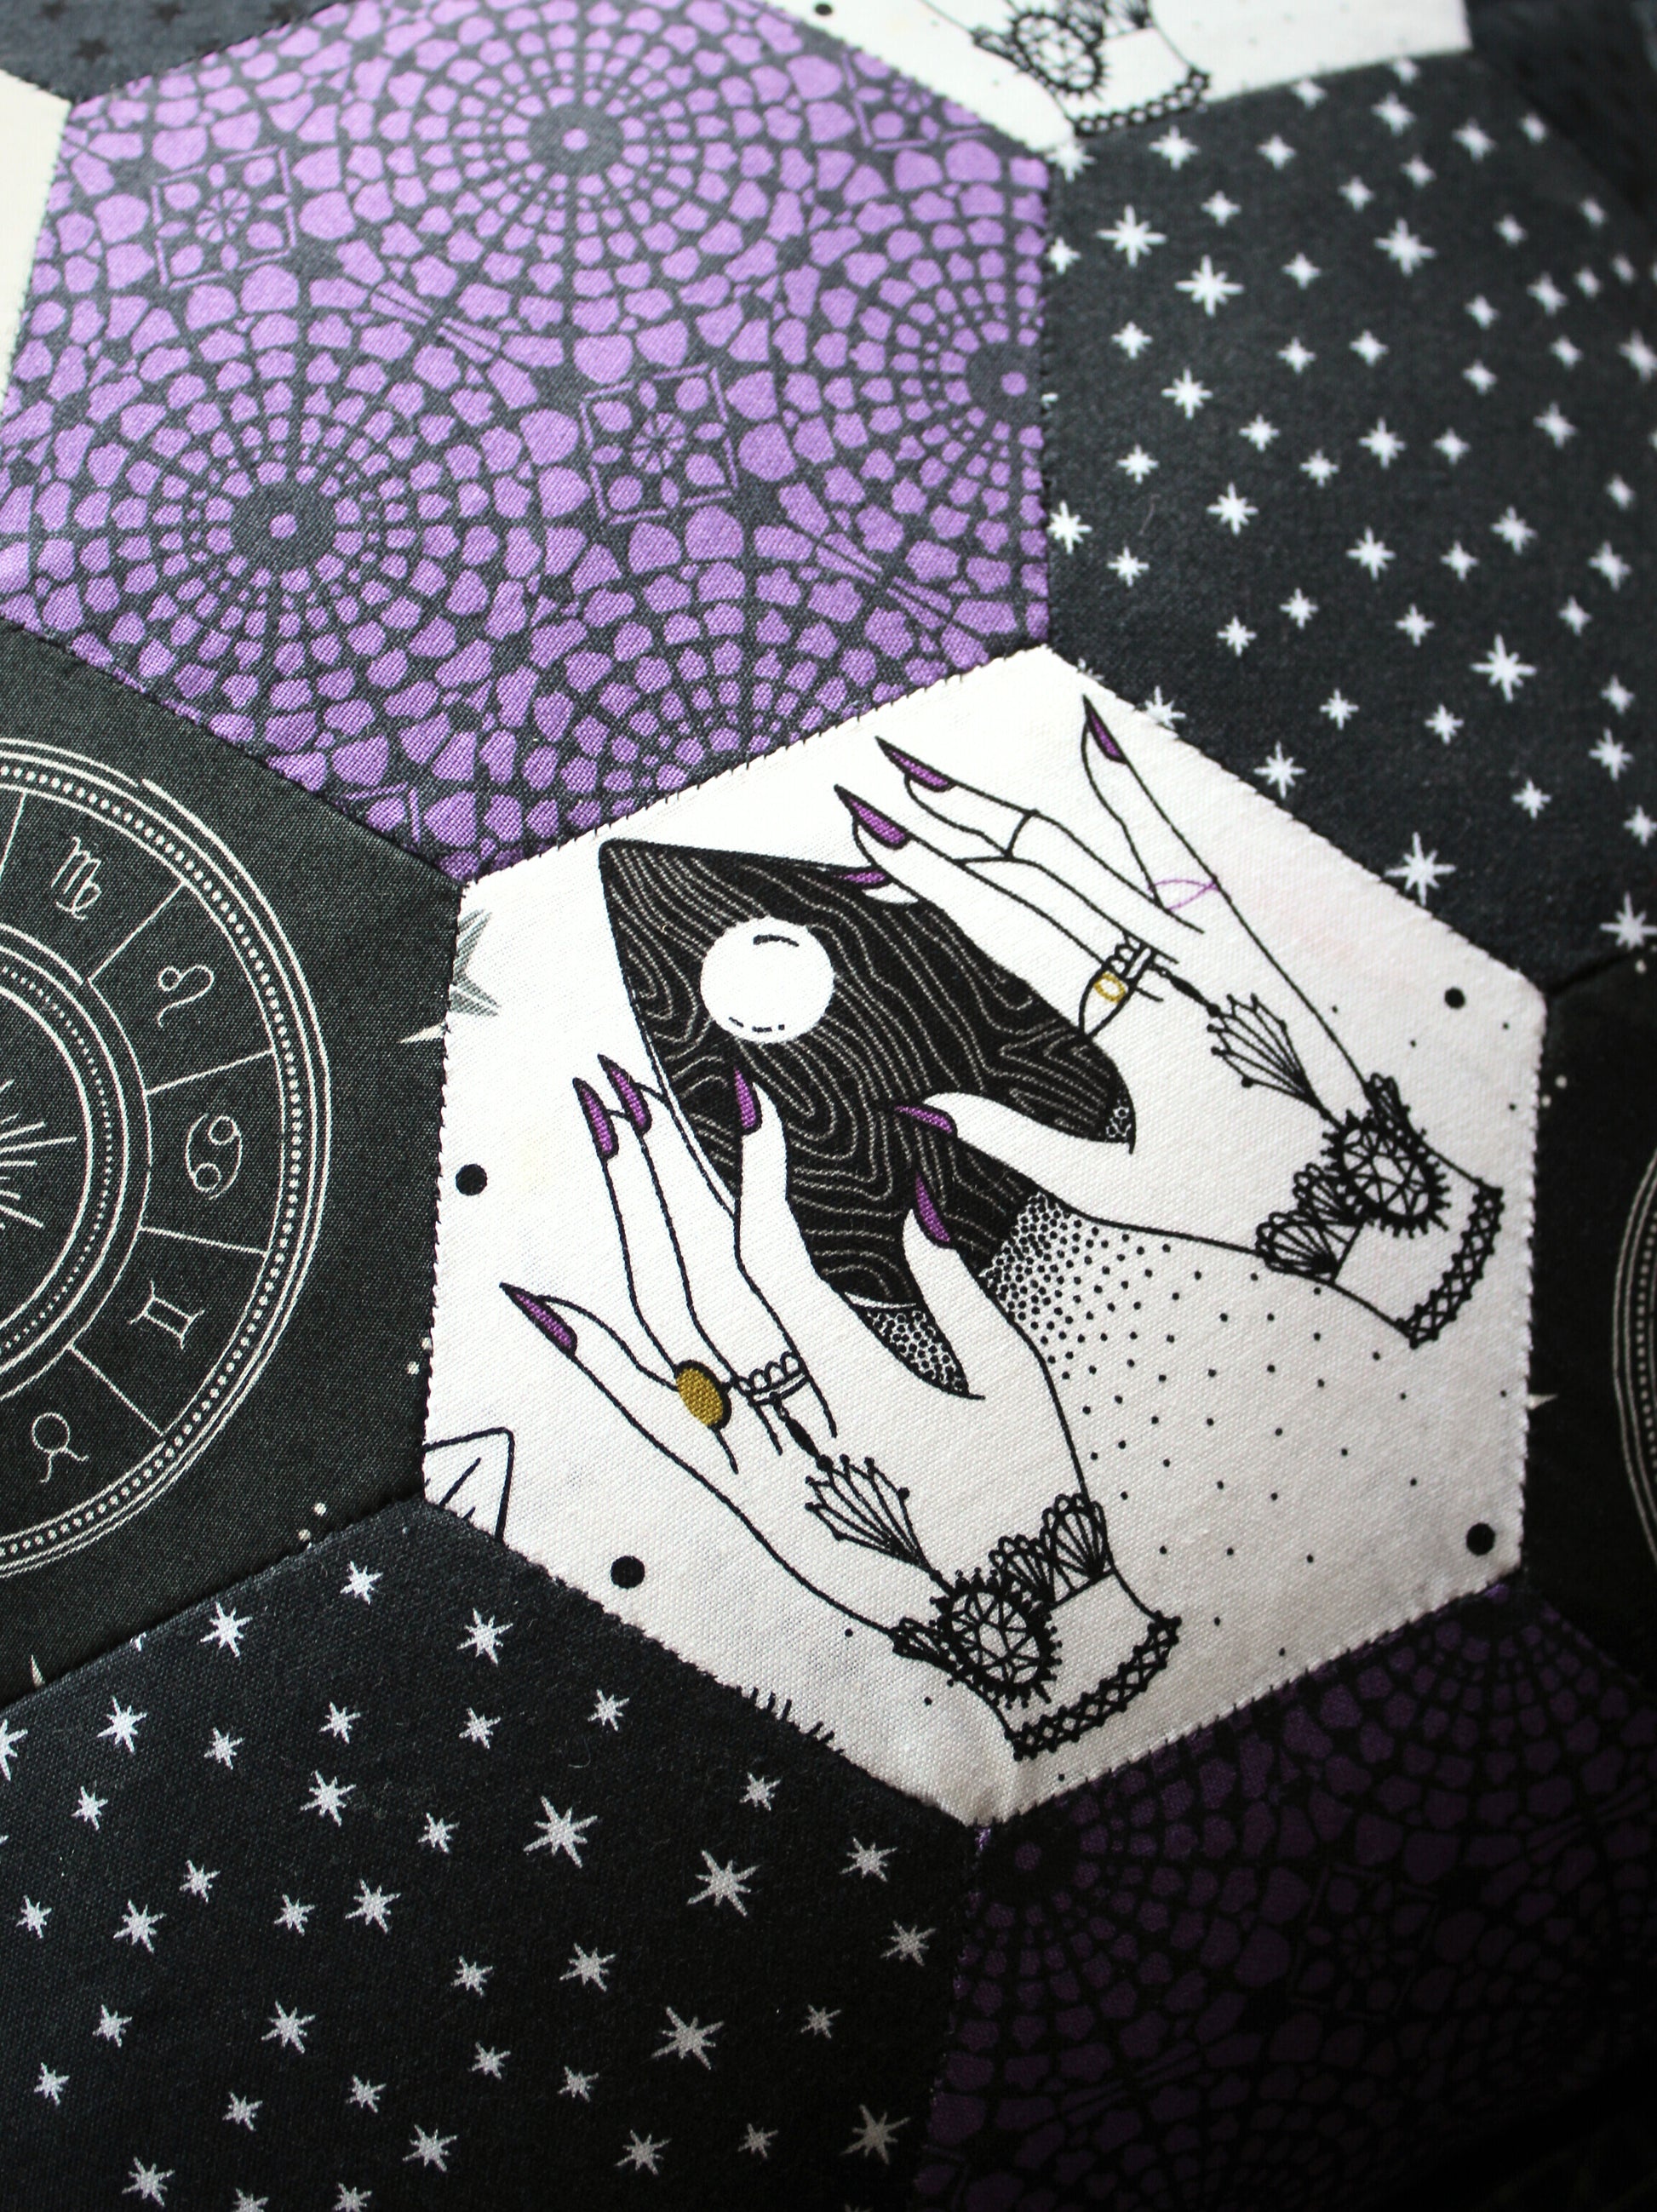 Close up of a hexagon patchwork, featuring a planchette design, stars and what looks like purple Gothic windows.